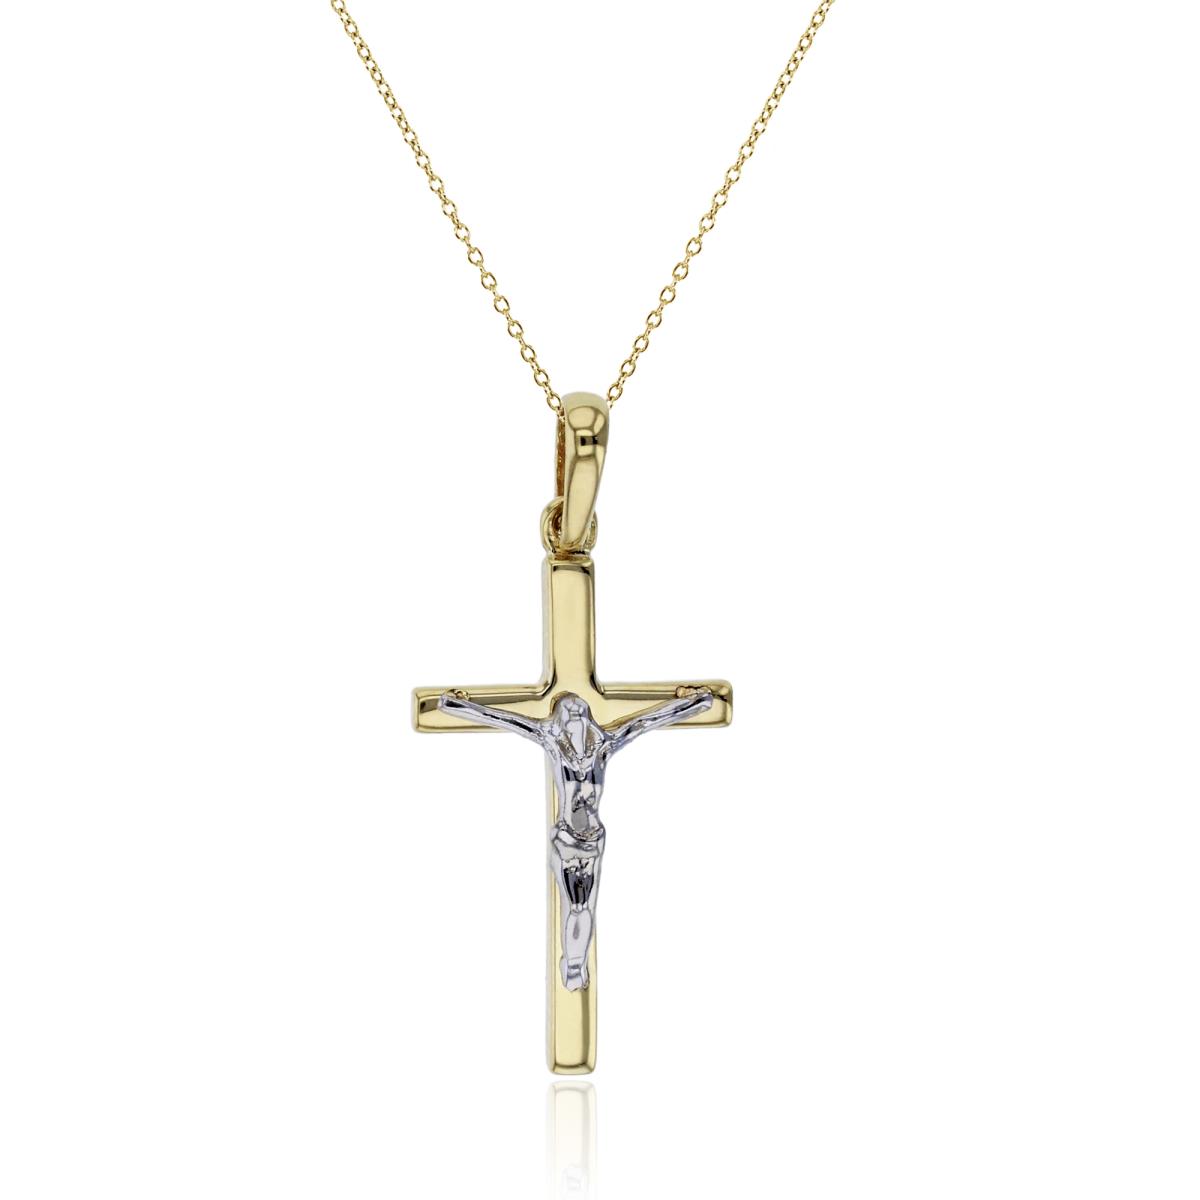 14K Two-Tone Gold 27x12mm Polished Crucifix Cross 18" Necklace